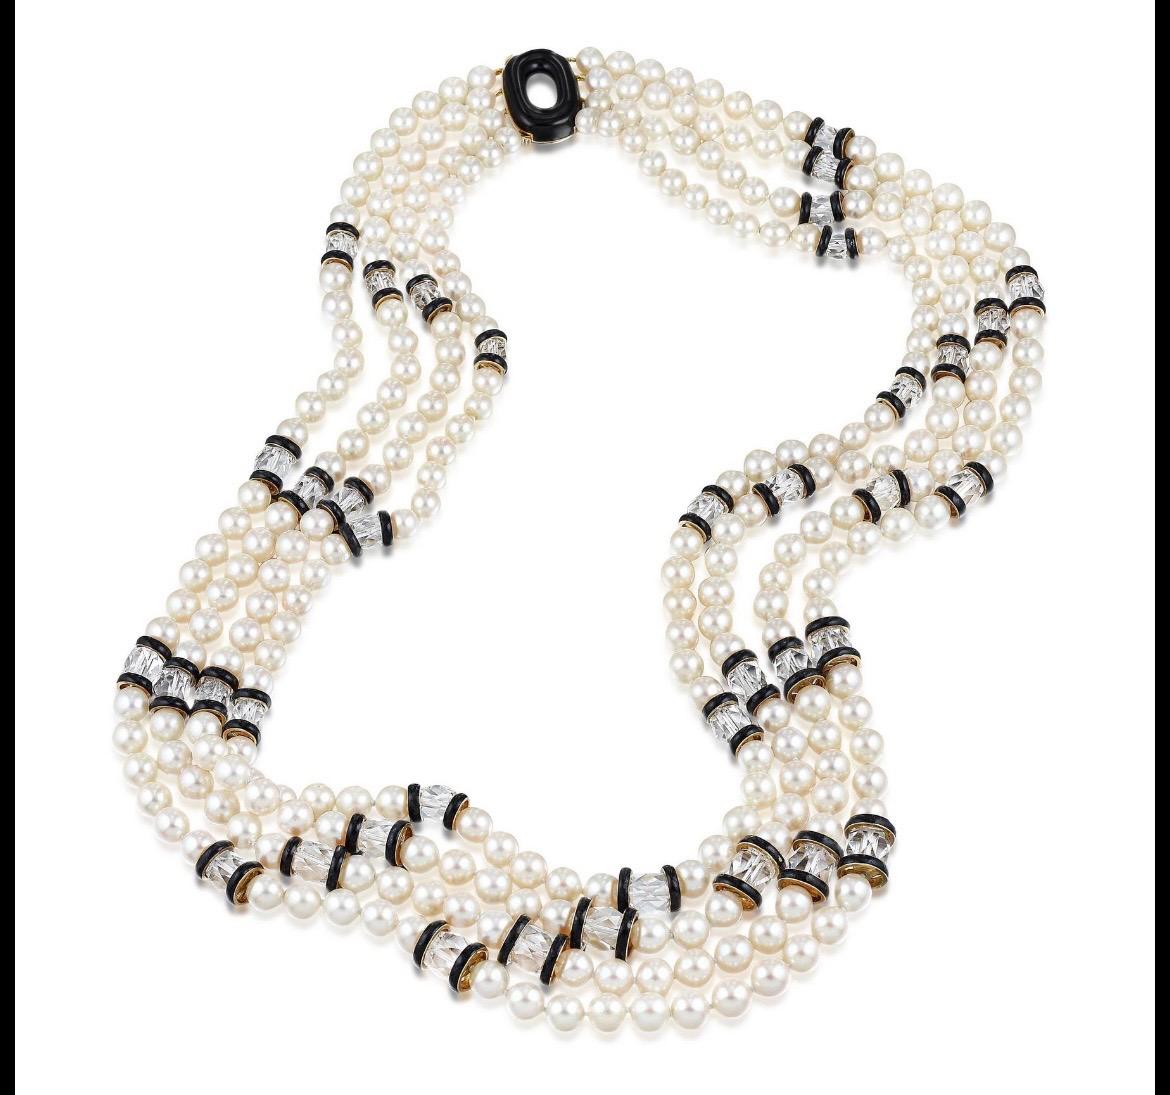 David Webb 4 Strand Pearl, Rock Crystal and Onyx Necklace In Excellent Condition For Sale In Saint Louis, MO